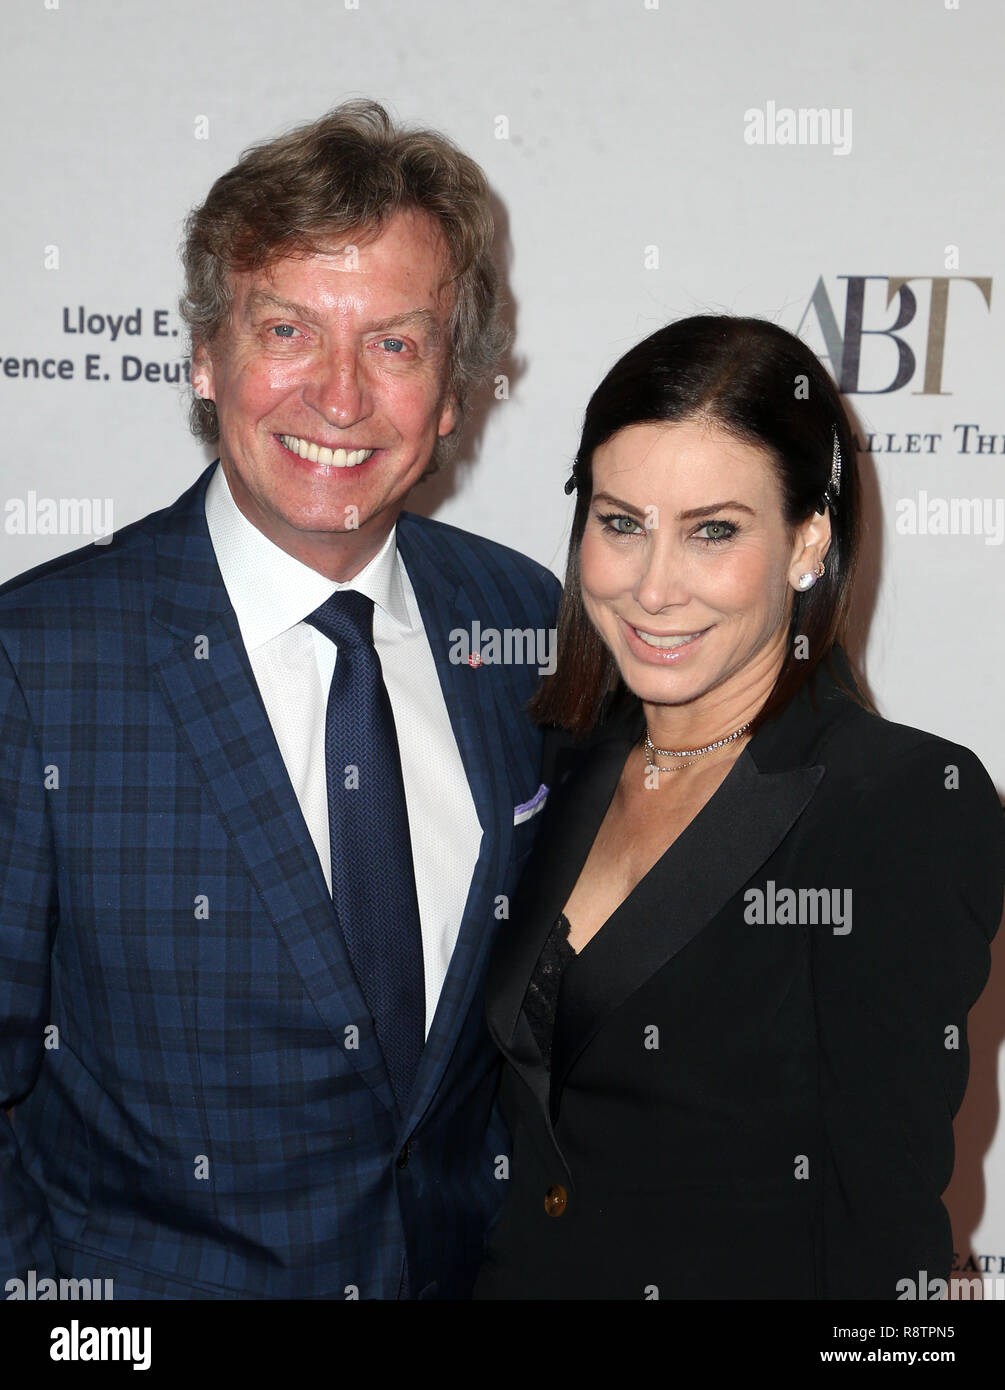 BEVERLY HILLS, CA - DECEMBER 17: Nigel Lythgoe and Sydney Holland at the American Ballet Theatre’s Annual Holiday Benefit at The Beverly Hilton Hotel in Beverly Hills, California on December 17, 2018. Credit: Faye Sadou/MediaPunch Stock Photo